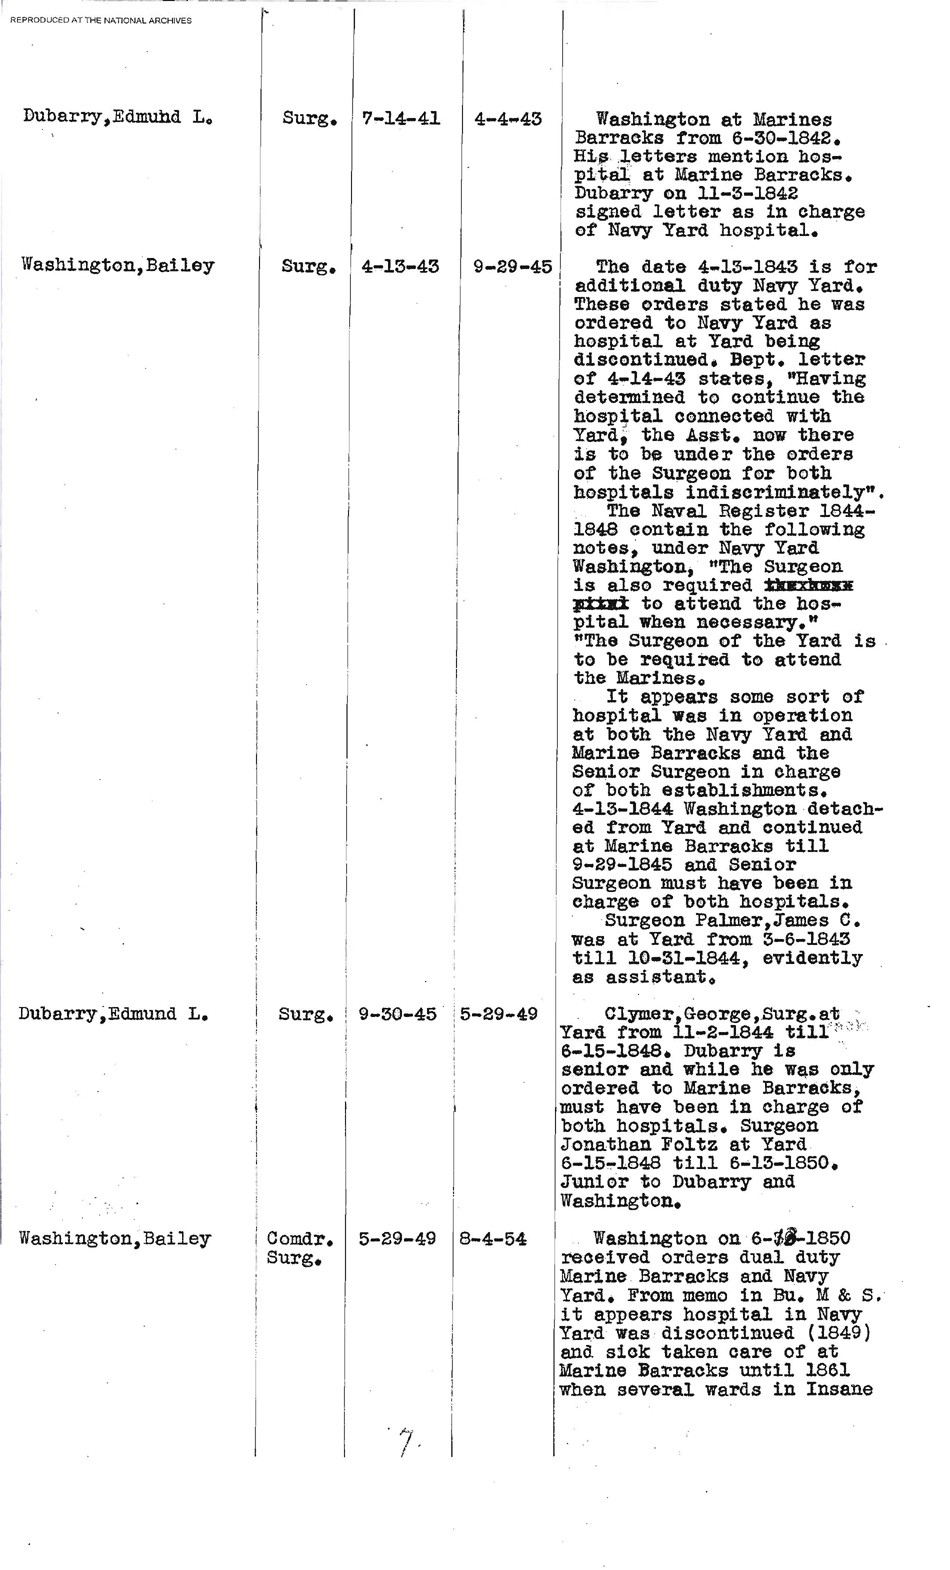 Roster of Commanding Officers of the Naval Hospital, Washington, DC, Page 7